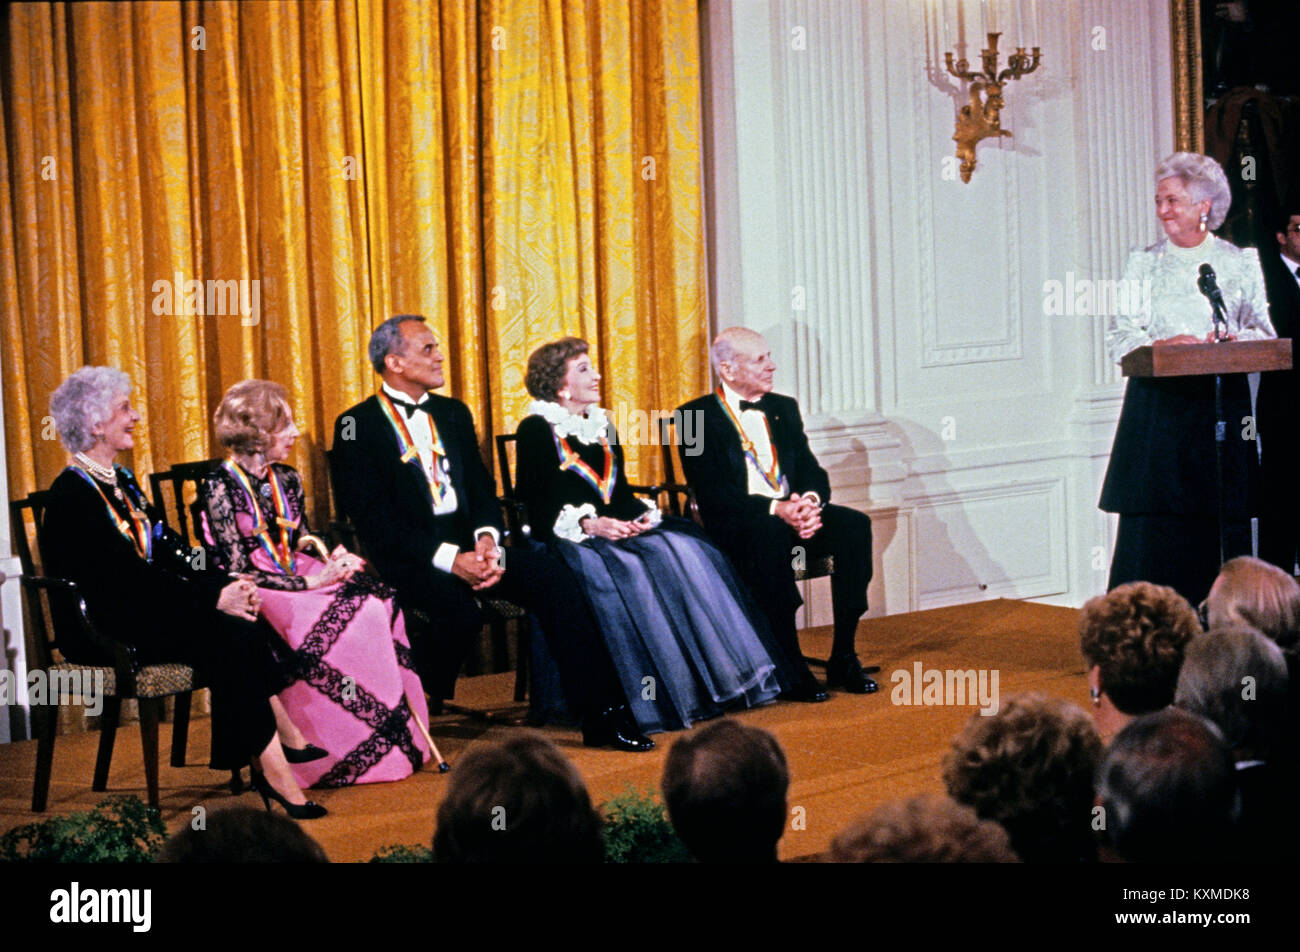 First lady Barbara Bush makes remarks during a ceremony for 1989 Kennedy Center Honorees in the East Room of the White House, December 3, 1989 in Washington, DC. The 1989 honorees are, from left to right: actress and singer Mary Martin, dancer Alexandra Danilova, singer and actor Harry Belafonte, actress Claudette Colbert, and composer William Schuman. Credit: Peter Heimsath / Pool via CNP /MediaPunch Stock Photo